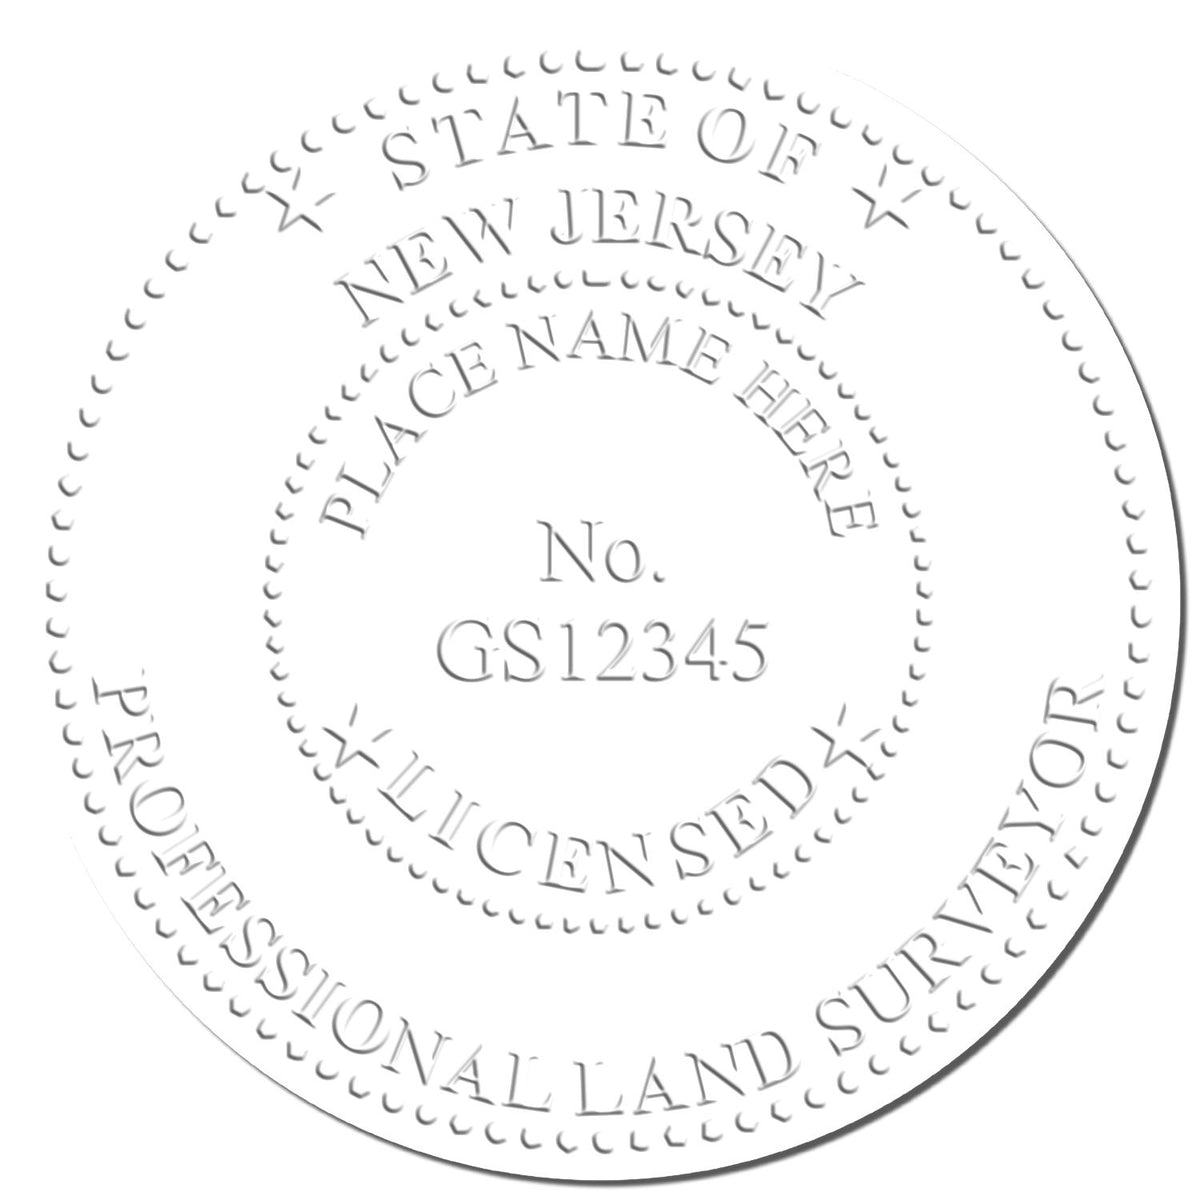 This paper is stamped with a sample imprint of the Hybrid New Jersey Land Surveyor Seal, signifying its quality and reliability.